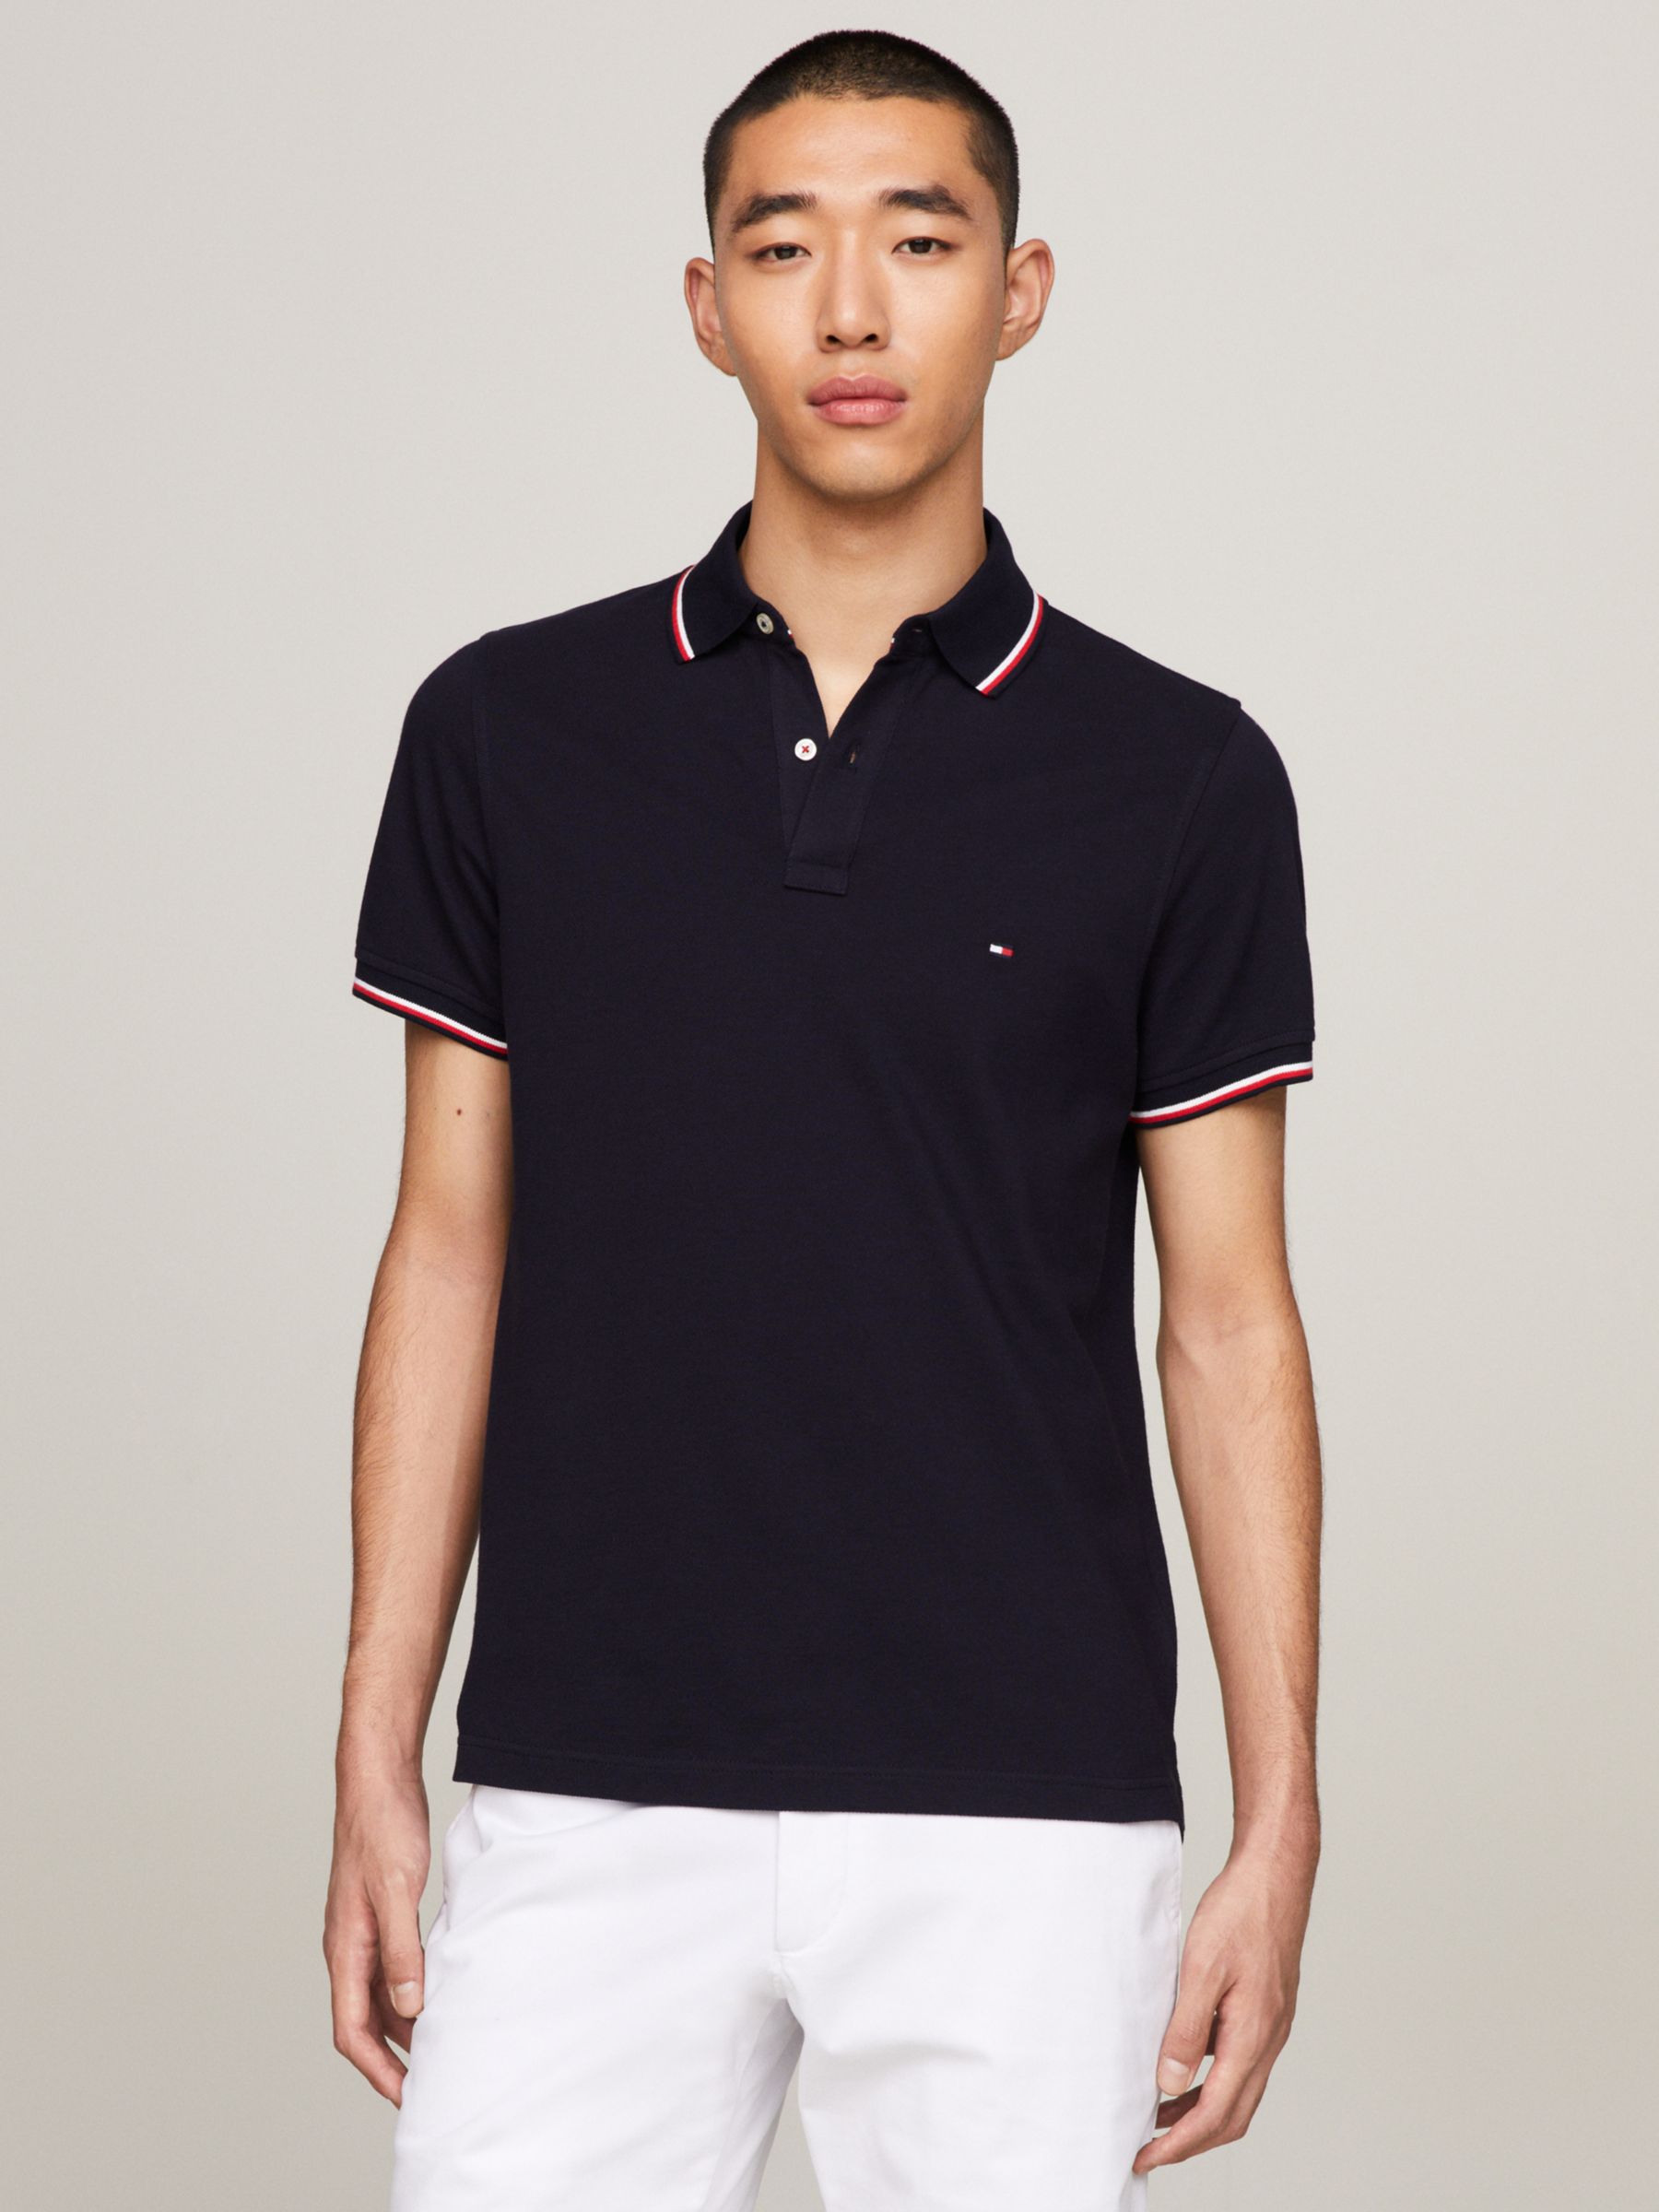 Tommy Hilfiger Tipped Desert Shirt, Slim Organic Cotton & at John Sky Partners Polo Fit Lewis